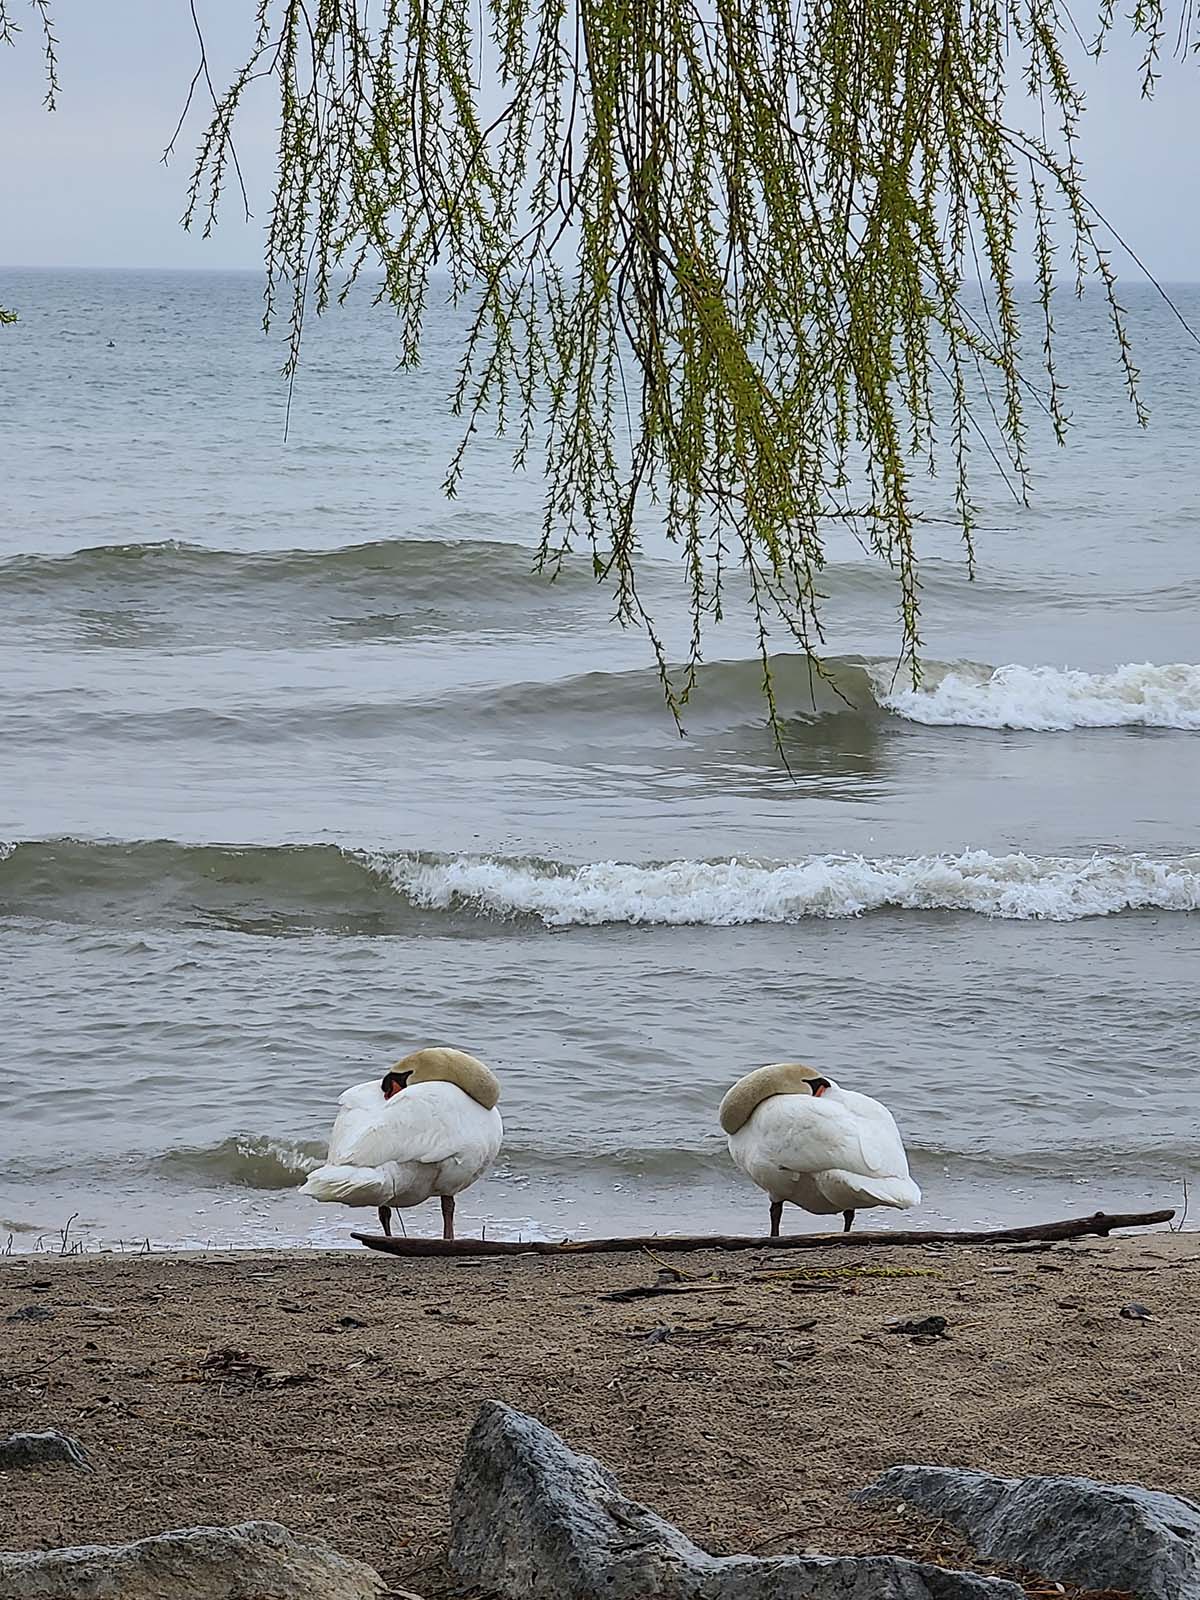 Two swans on a beach, with waves crashing behind them.